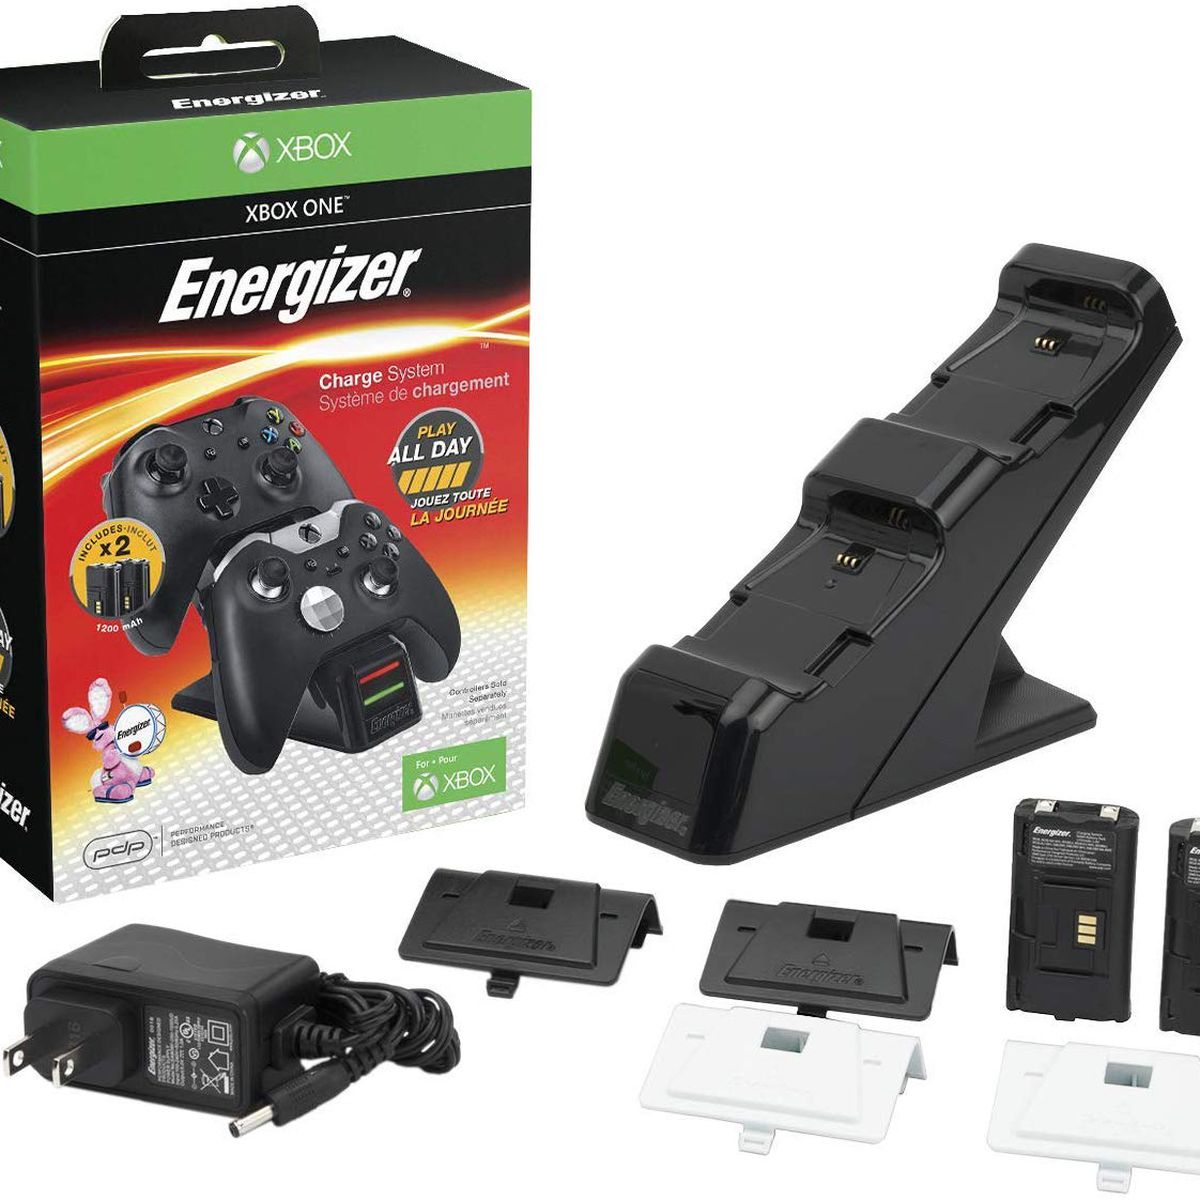 Product shot of the components of Energizer’s xbox controller charging station